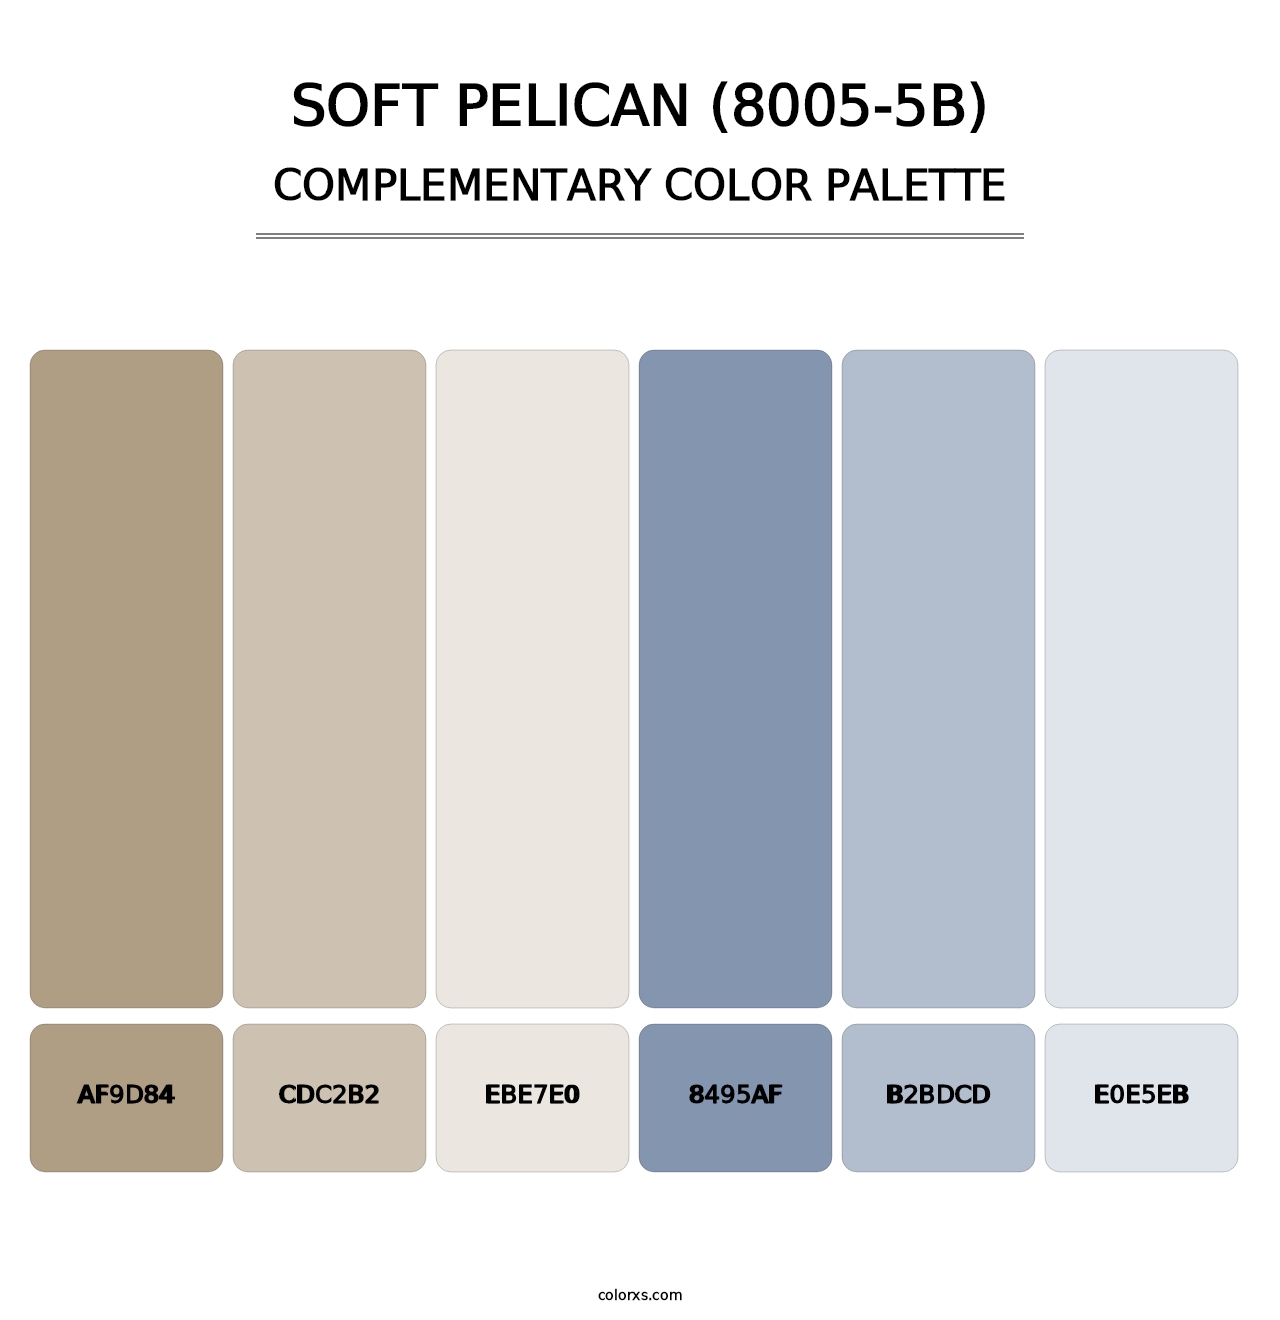 Soft Pelican (8005-5B) - Complementary Color Palette